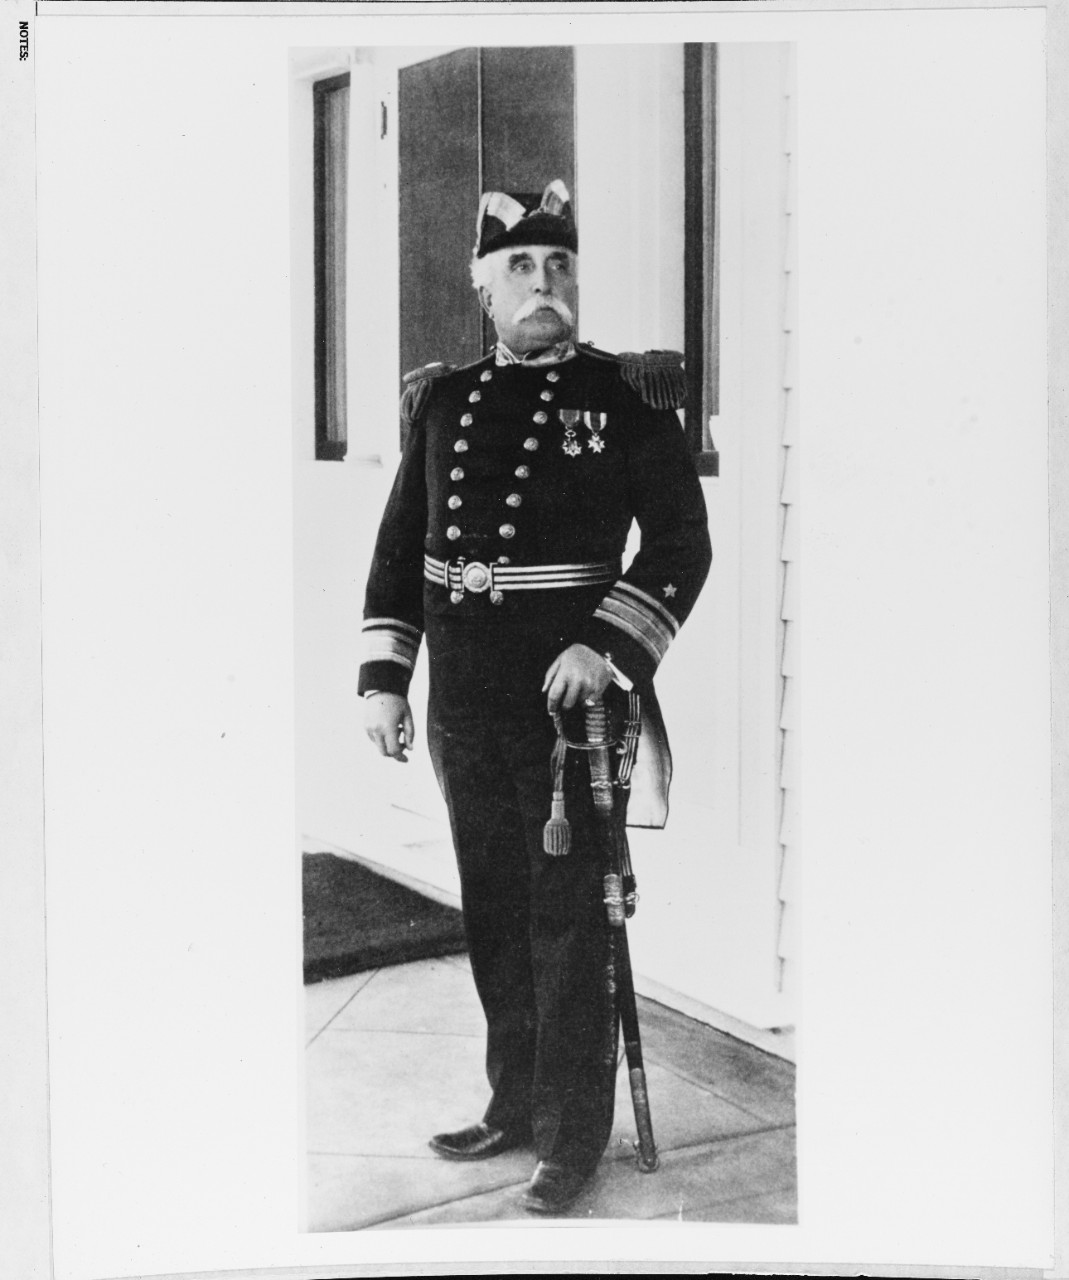 Rear Admiral William Henry Whiting, U.S. Naval Academy class of 1863.